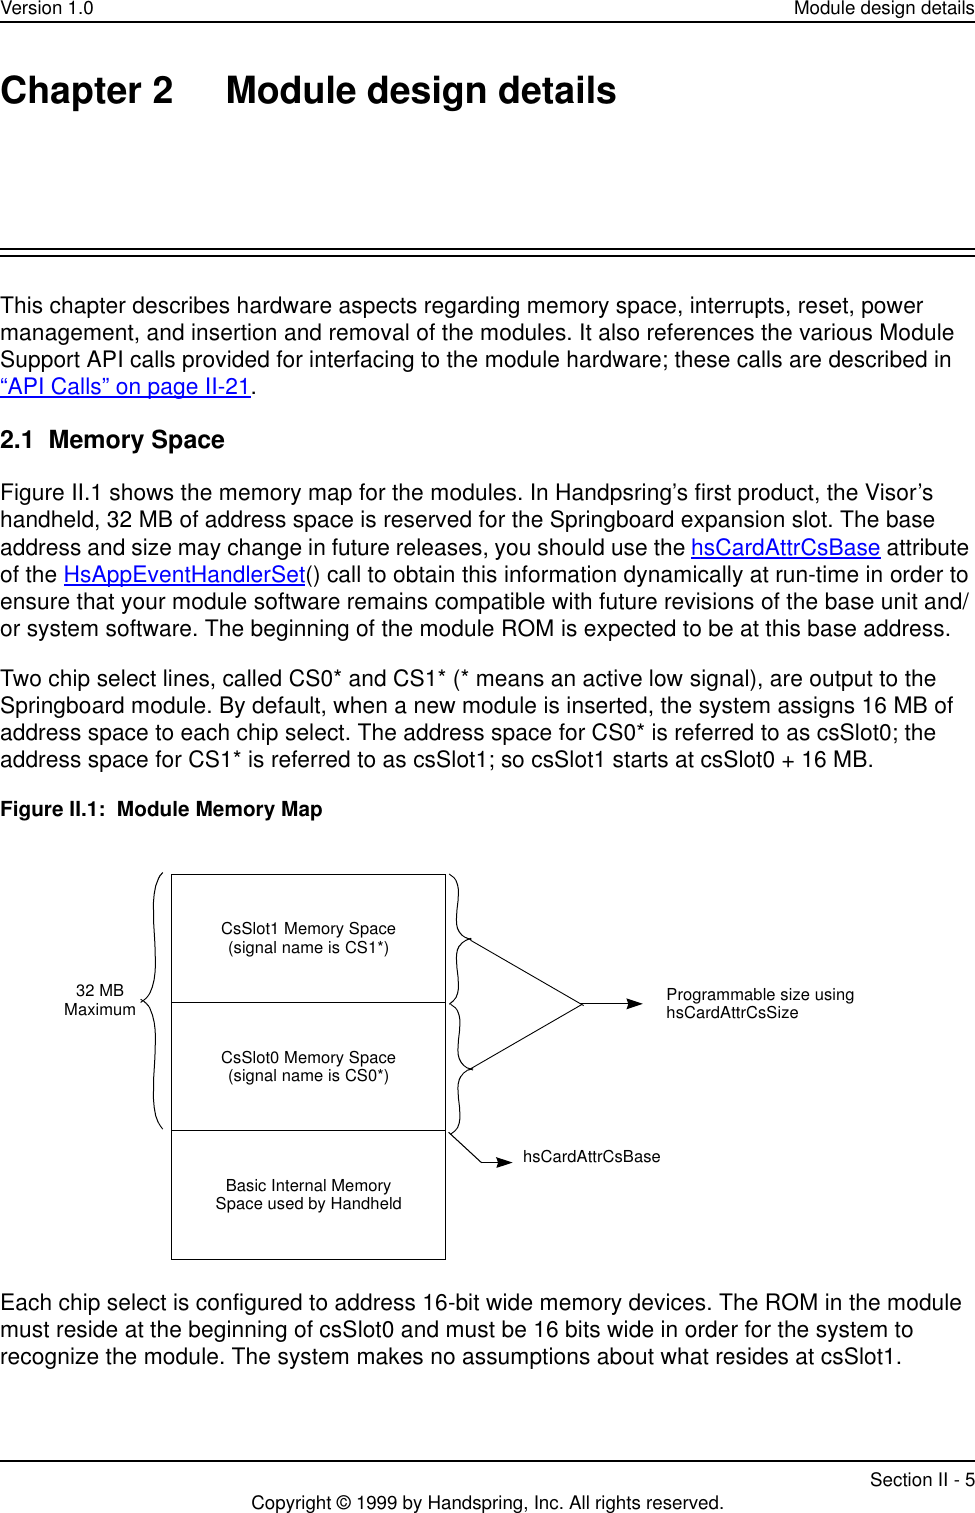 Version 1.0 Module design detailsSection II - 5Copyright © 1999 by Handspring, Inc. All rights reserved.Chapter 2 Module design detailsThis chapter describes hardware aspects regarding memory space, interrupts, reset, power management, and insertion and removal of the modules. It also references the various Module Support API calls provided for interfacing to the module hardware; these calls are described in “API Calls” on page II-21.2.1  Memory SpaceFigure II.1 shows the memory map for the modules. In Handpsring’s first product, the Visor’s handheld, 32 MB of address space is reserved for the Springboard expansion slot. The base address and size may change in future releases, you should use the hsCardAttrCsBase attribute of the HsAppEventHandlerSet() call to obtain this information dynamically at run-time in order to ensure that your module software remains compatible with future revisions of the base unit and/or system software. The beginning of the module ROM is expected to be at this base address.Two chip select lines, called CS0* and CS1* (* means an active low signal), are output to the Springboard module. By default, when a new module is inserted, the system assigns 16 MB of address space to each chip select. The address space for CS0* is referred to as csSlot0; the address space for CS1* is referred to as csSlot1; so csSlot1 starts at csSlot0 + 16 MB.Figure II.1:  Module Memory MapEach chip select is configured to address 16-bit wide memory devices. The ROM in the module must reside at the beginning of csSlot0 and must be 16 bits wide in order for the system to recognize the module. The system makes no assumptions about what resides at csSlot1. Programmable size usinghsCardAttrCsSizeCsSlot1 Memory Space(signal name is CS1*)CsSlot0 Memory Space(signal name is CS0*)Basic Internal MemorySpace used by Handheld32 MBMaximumhsCardAttrCsBase